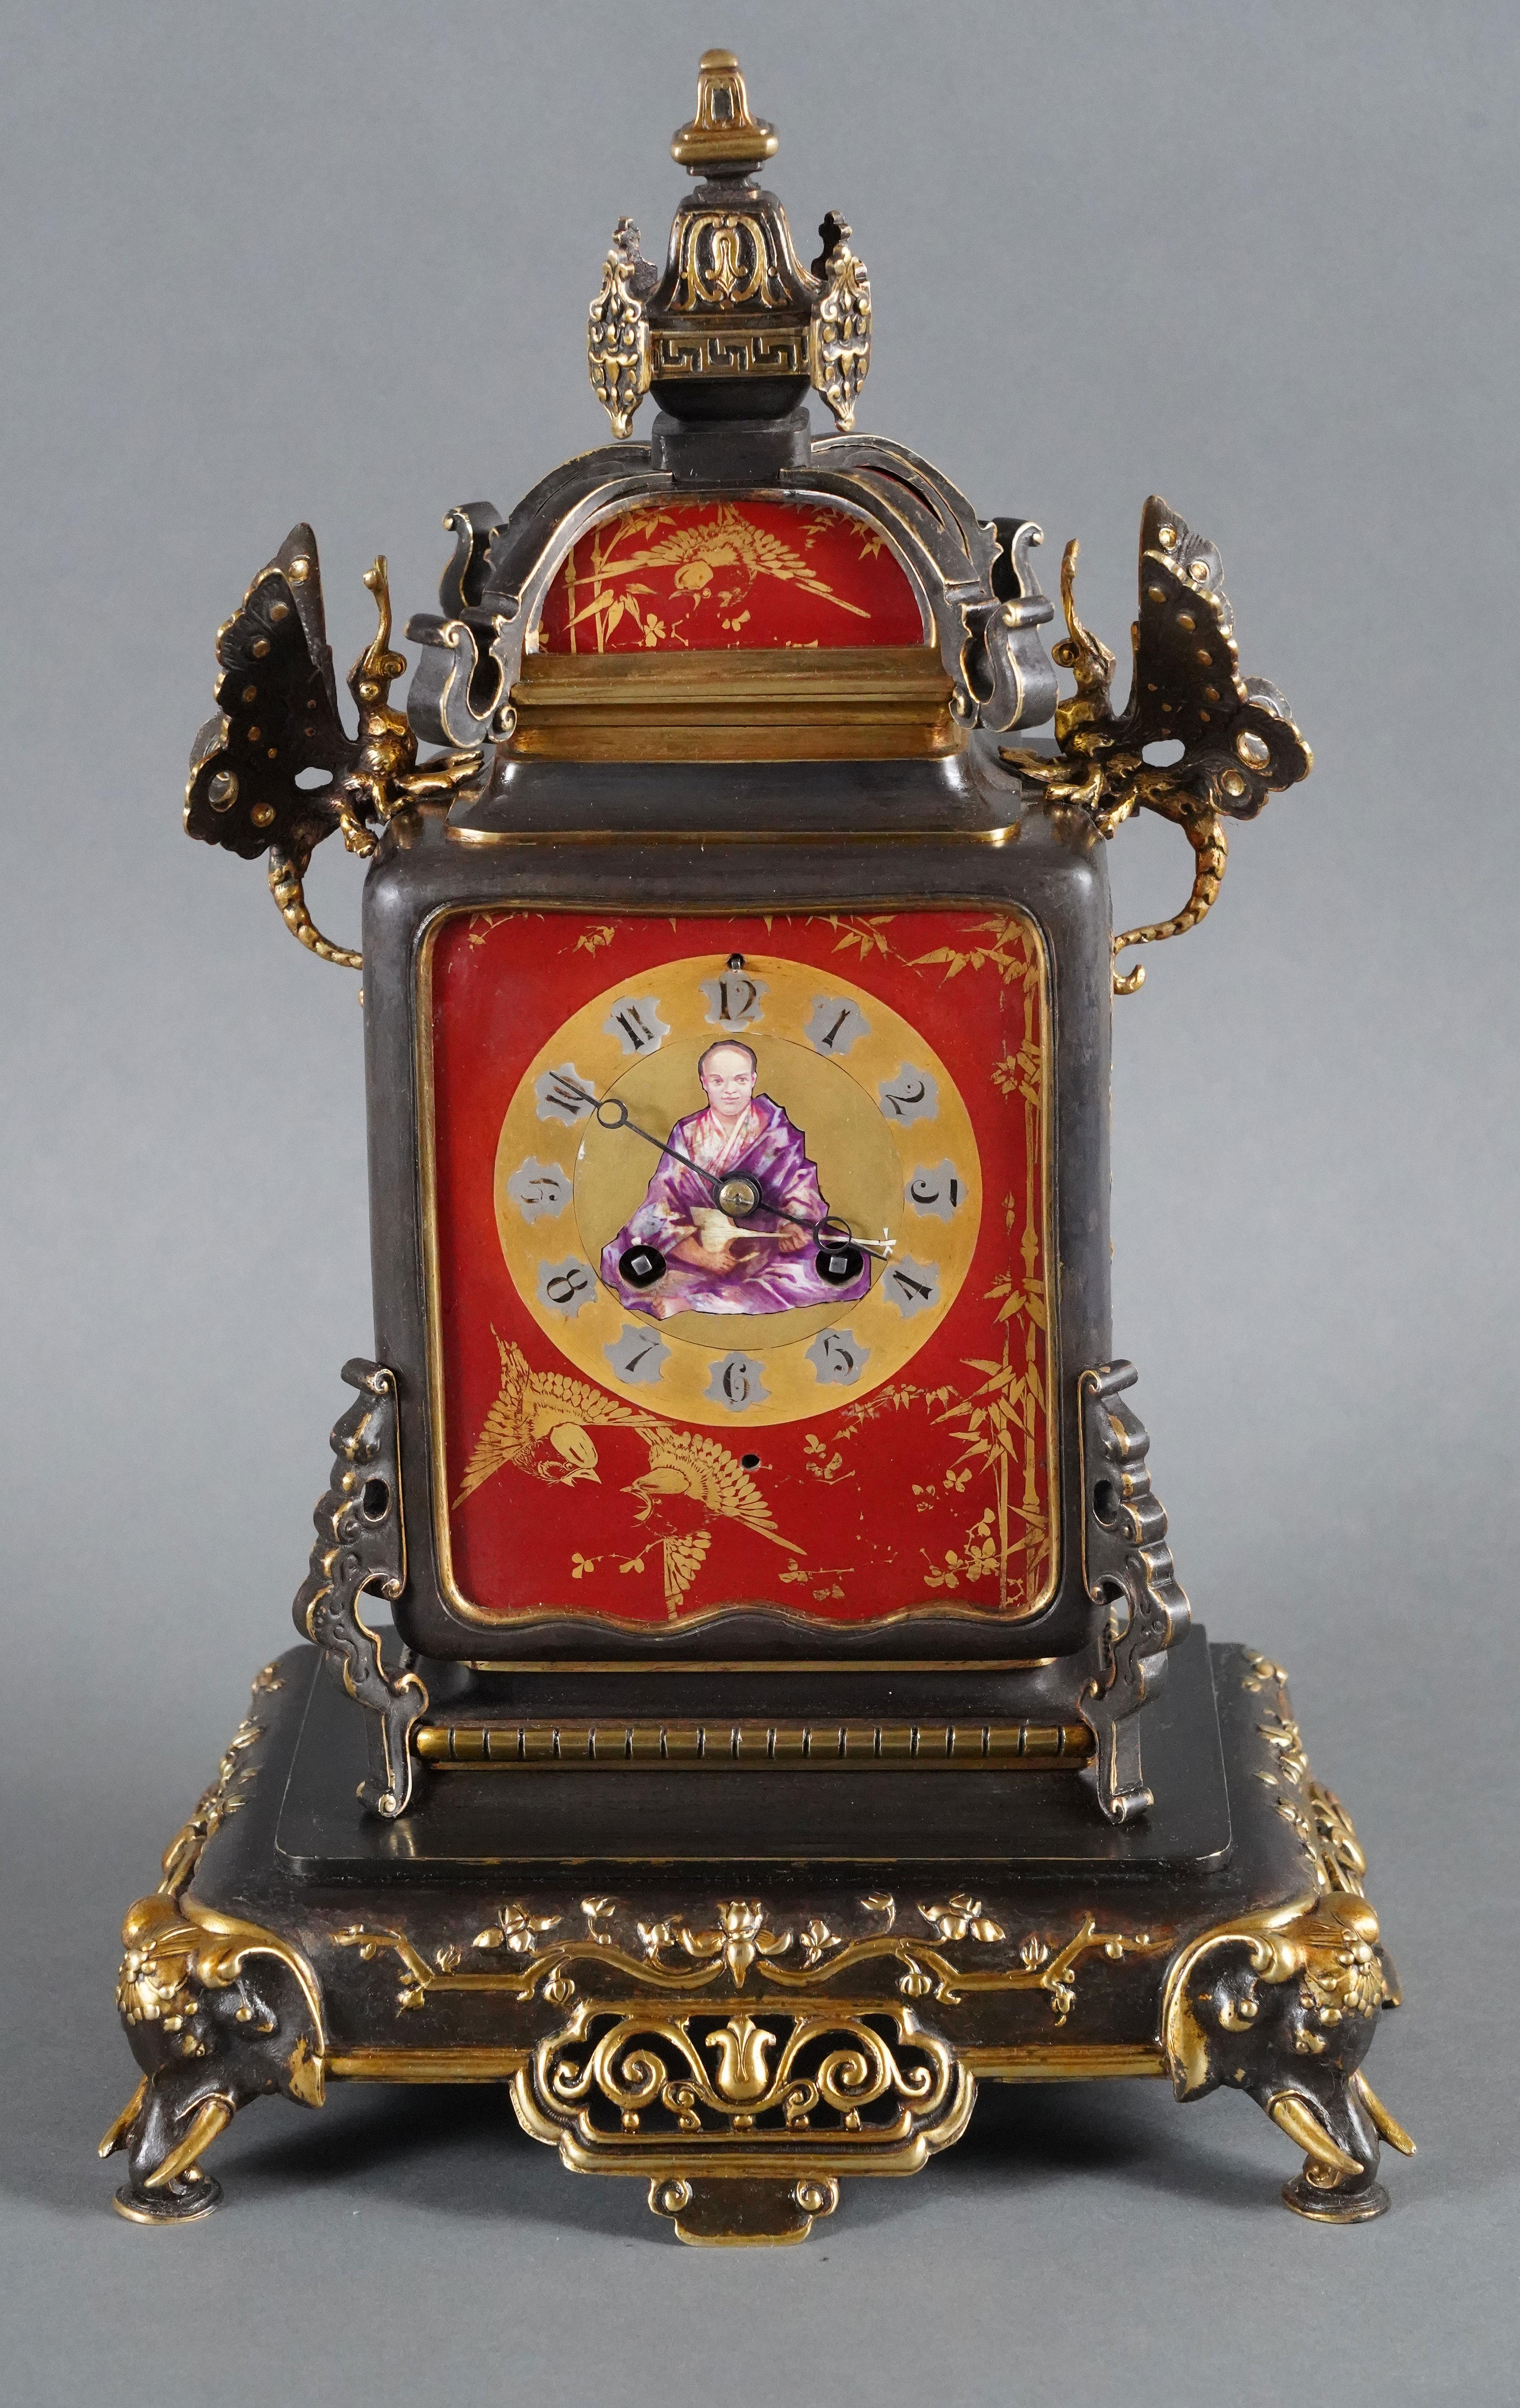 Amusing bronze with double patina and porcelain clock in the shape of a covered jar.
This clock, with a dial with Arabic numerals decorated in its center with a seated lute player, is topped with a lantern and framed by two butterflies with